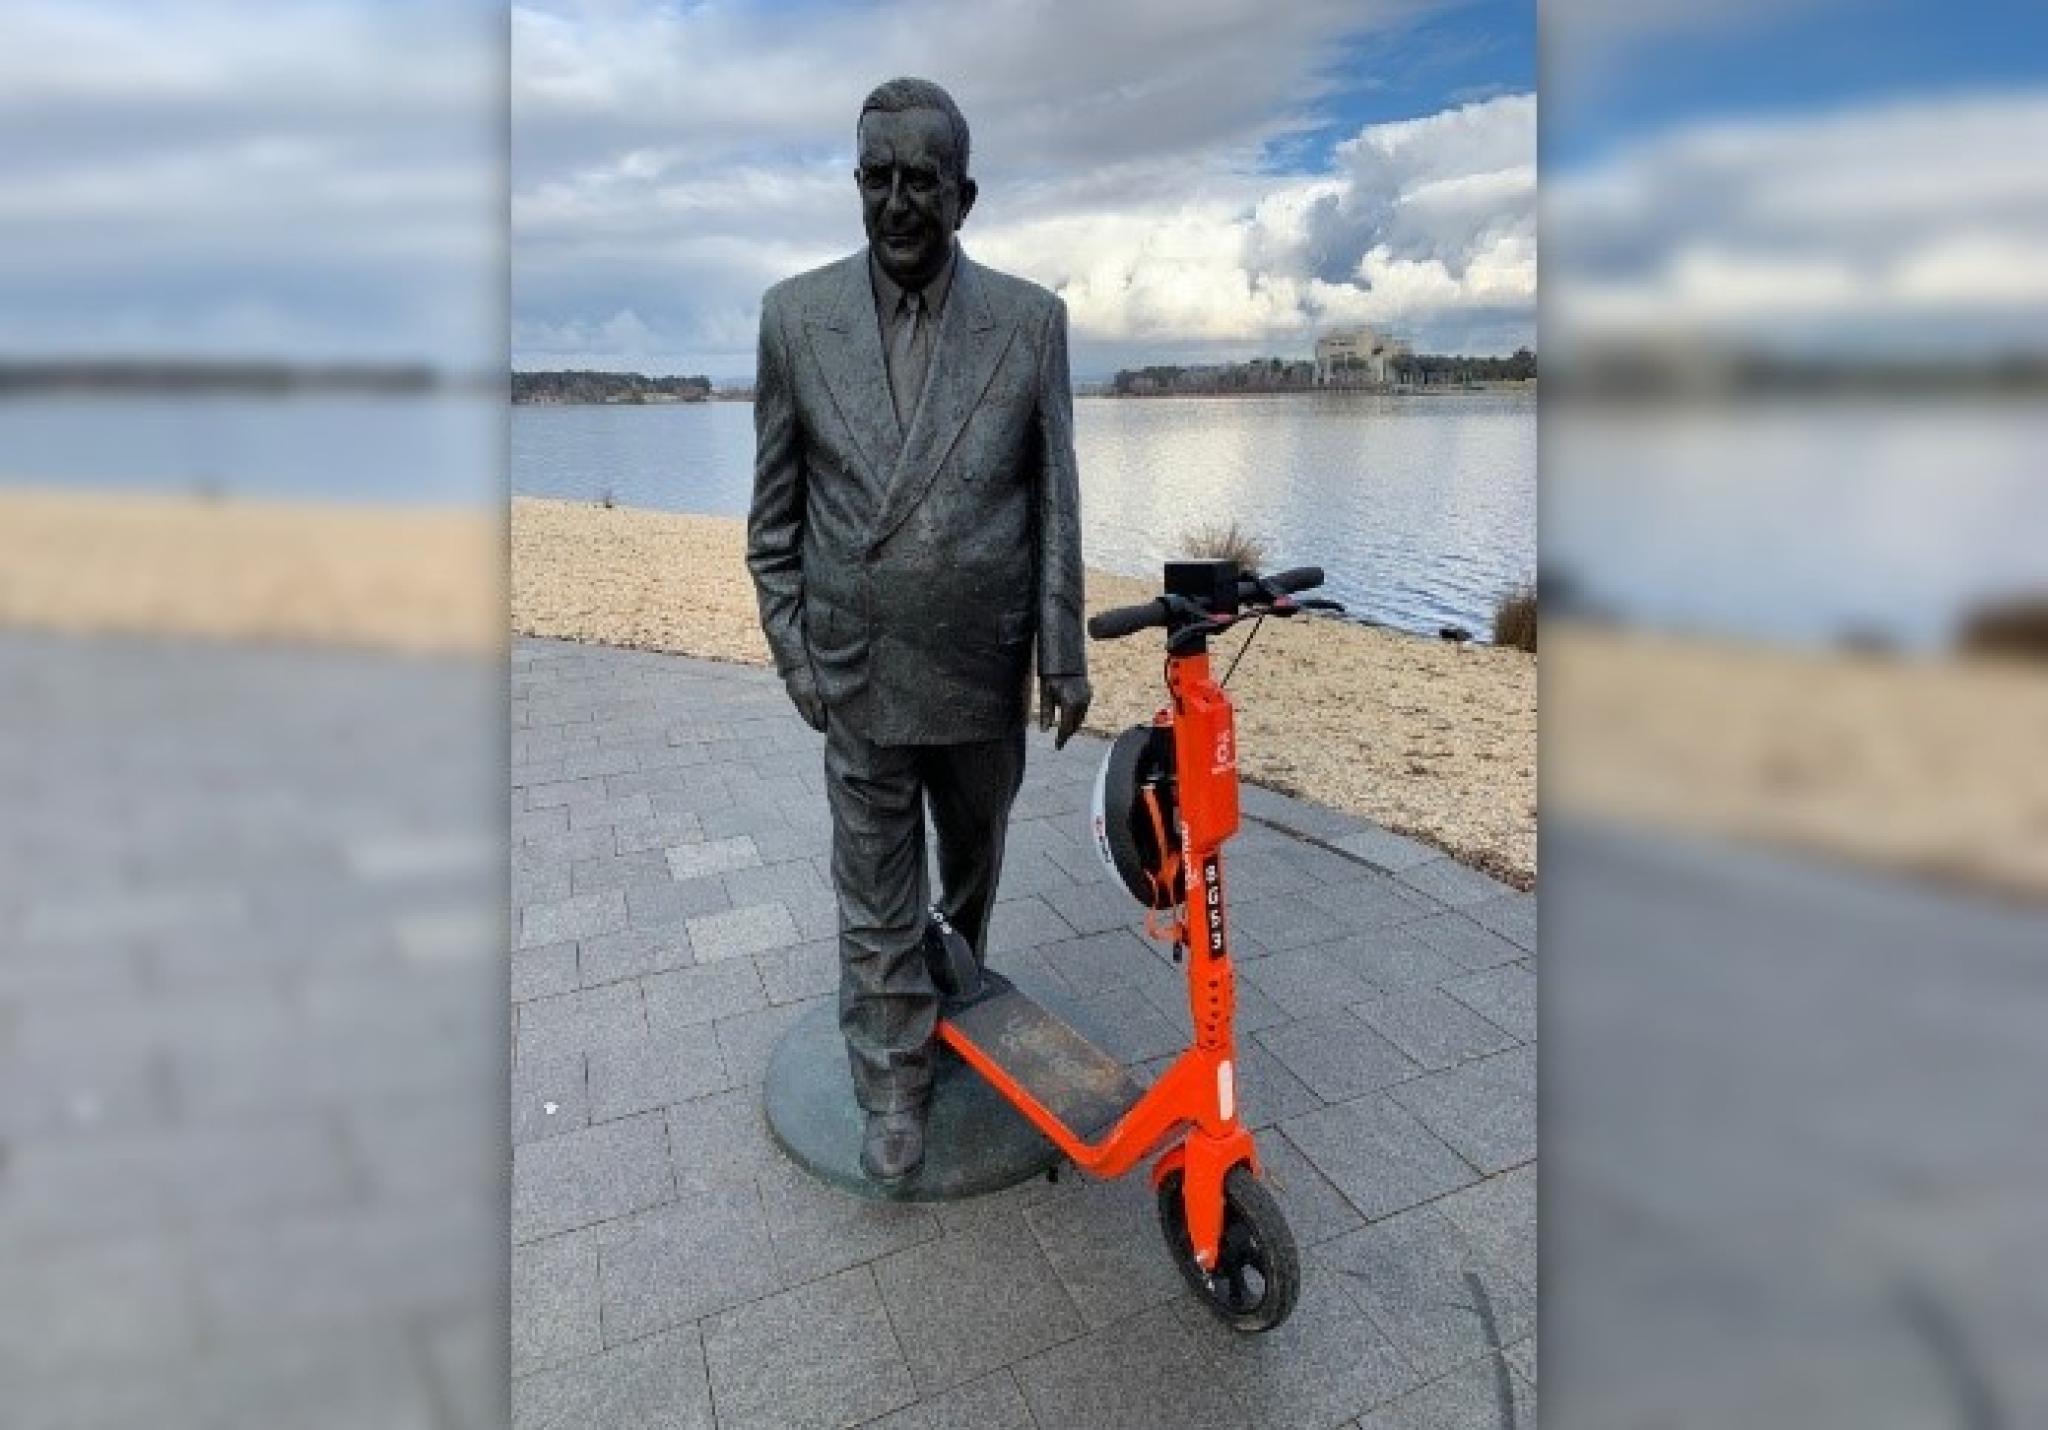 Statue positioned as if riding a scooter